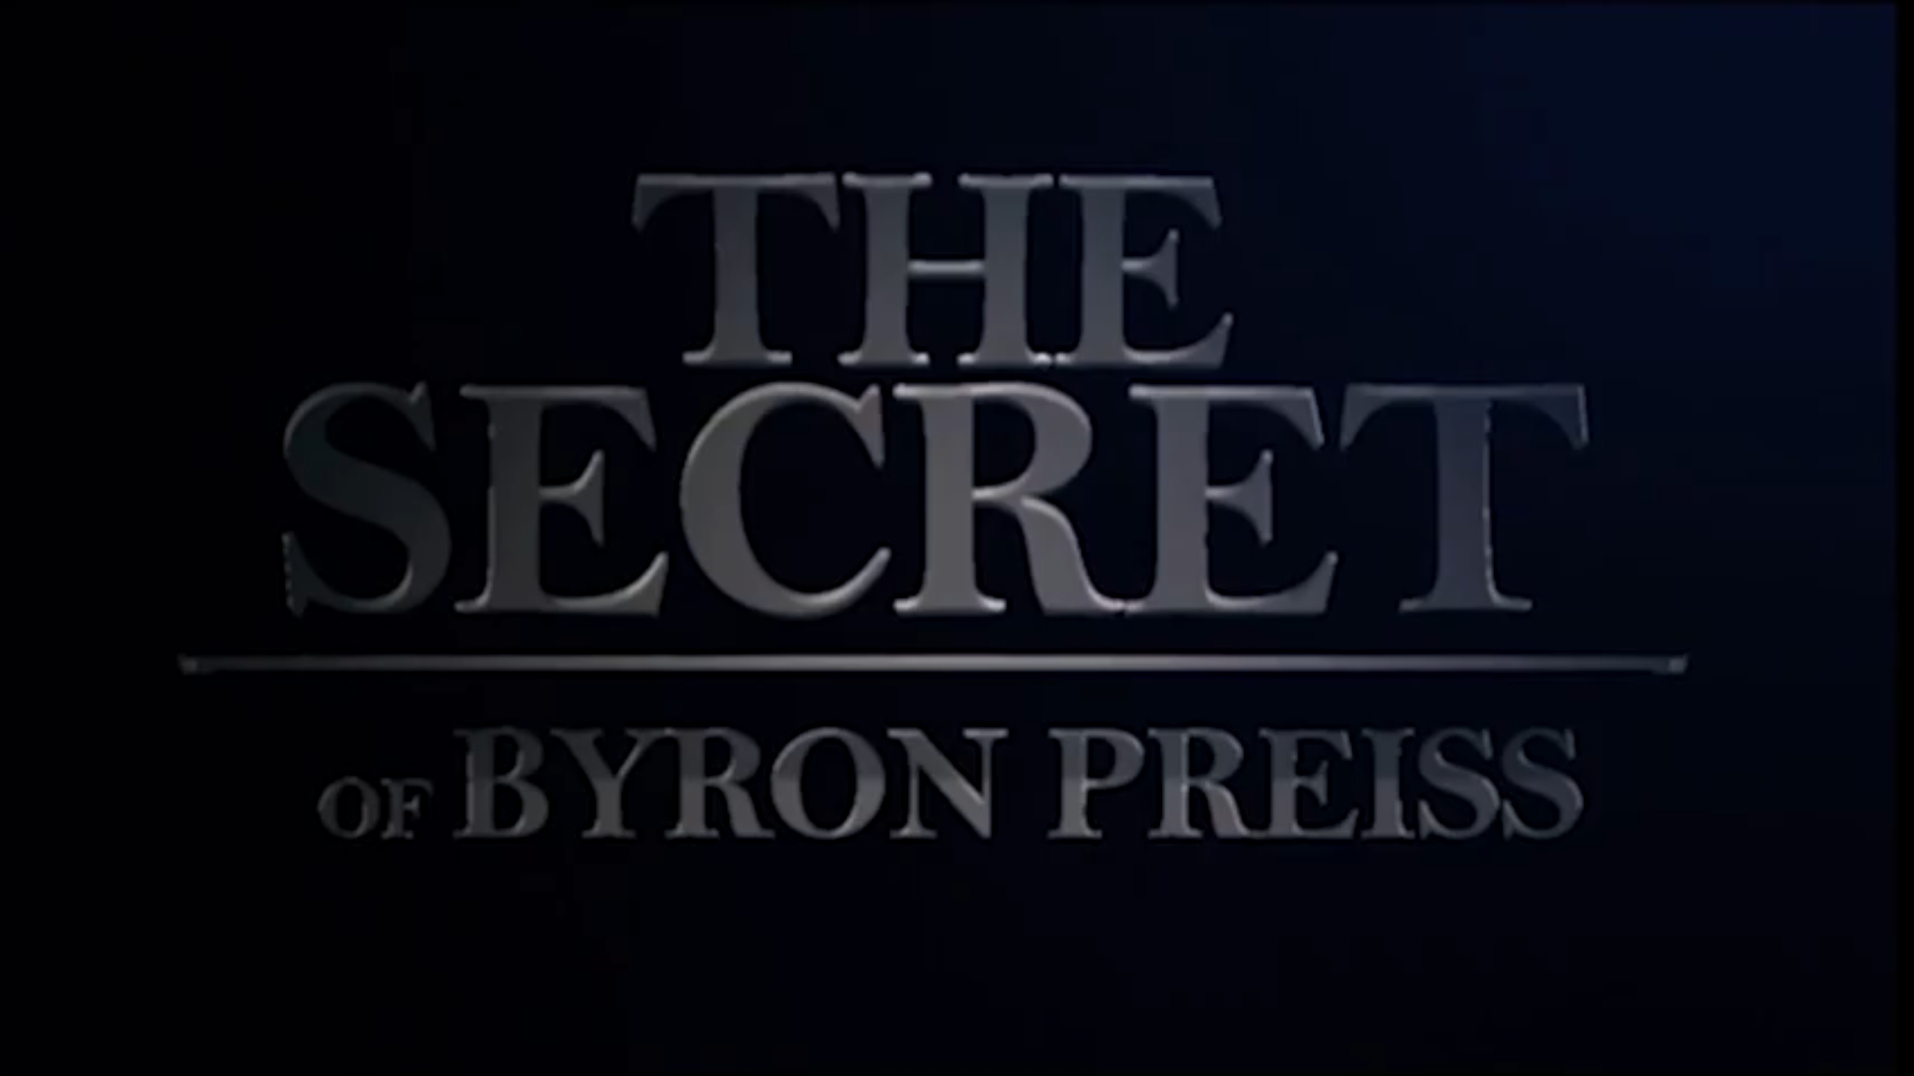 Review on the Upcoming Documentary: The Secret by Byron Preiss